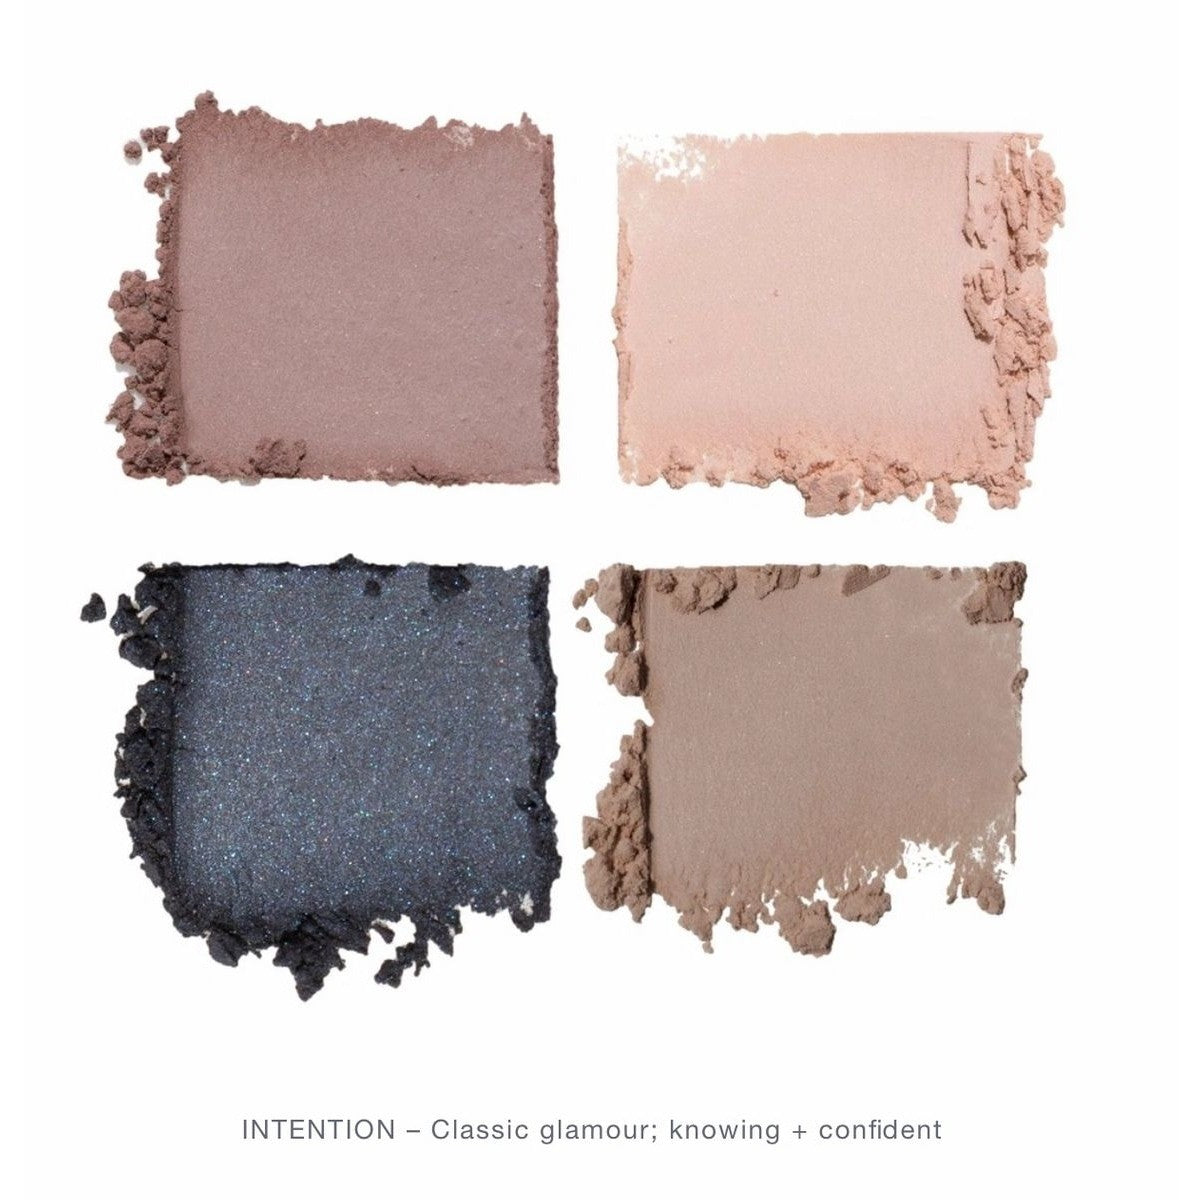 VAPOUR EYESHADOW QUAD INTENTION